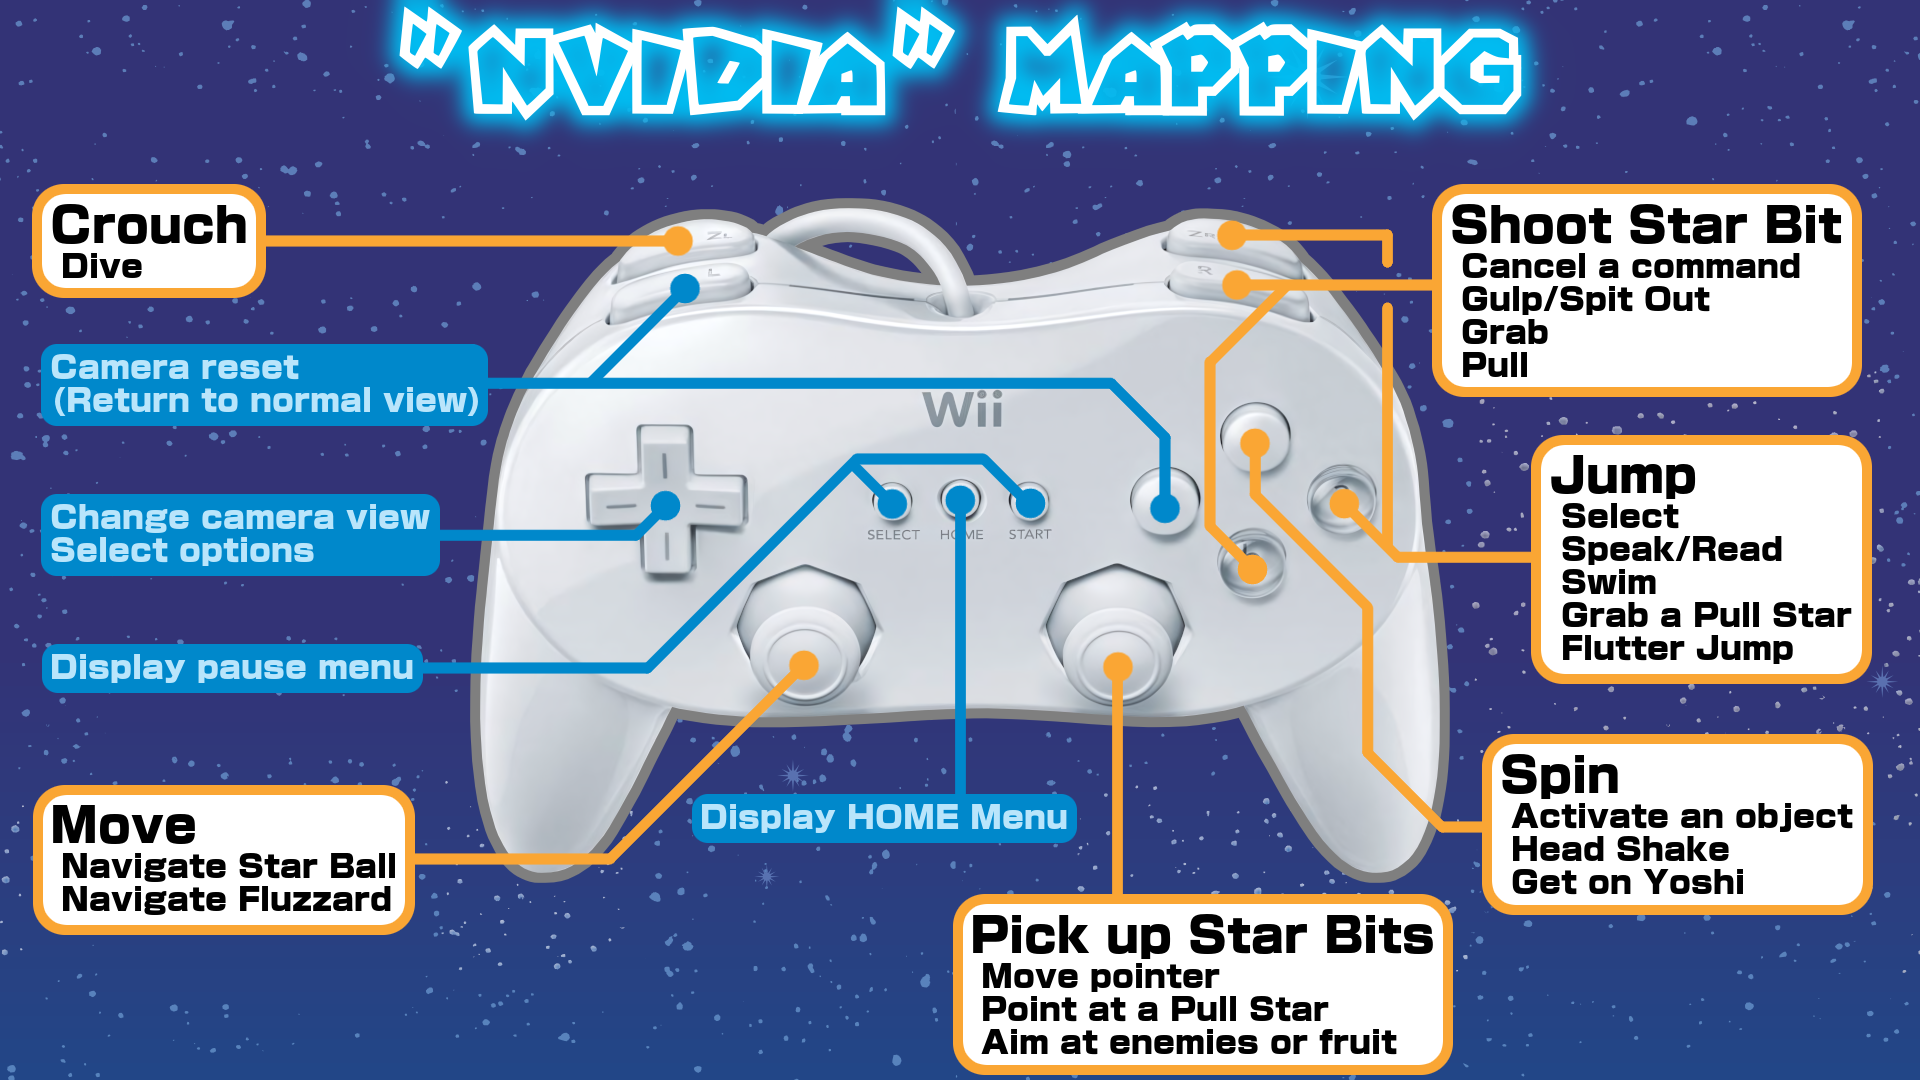 Play Super Mario Galaxy 2 using the Wii U GamePad | Page 4 | GBAtemp.net -  The Independent Video Game Community